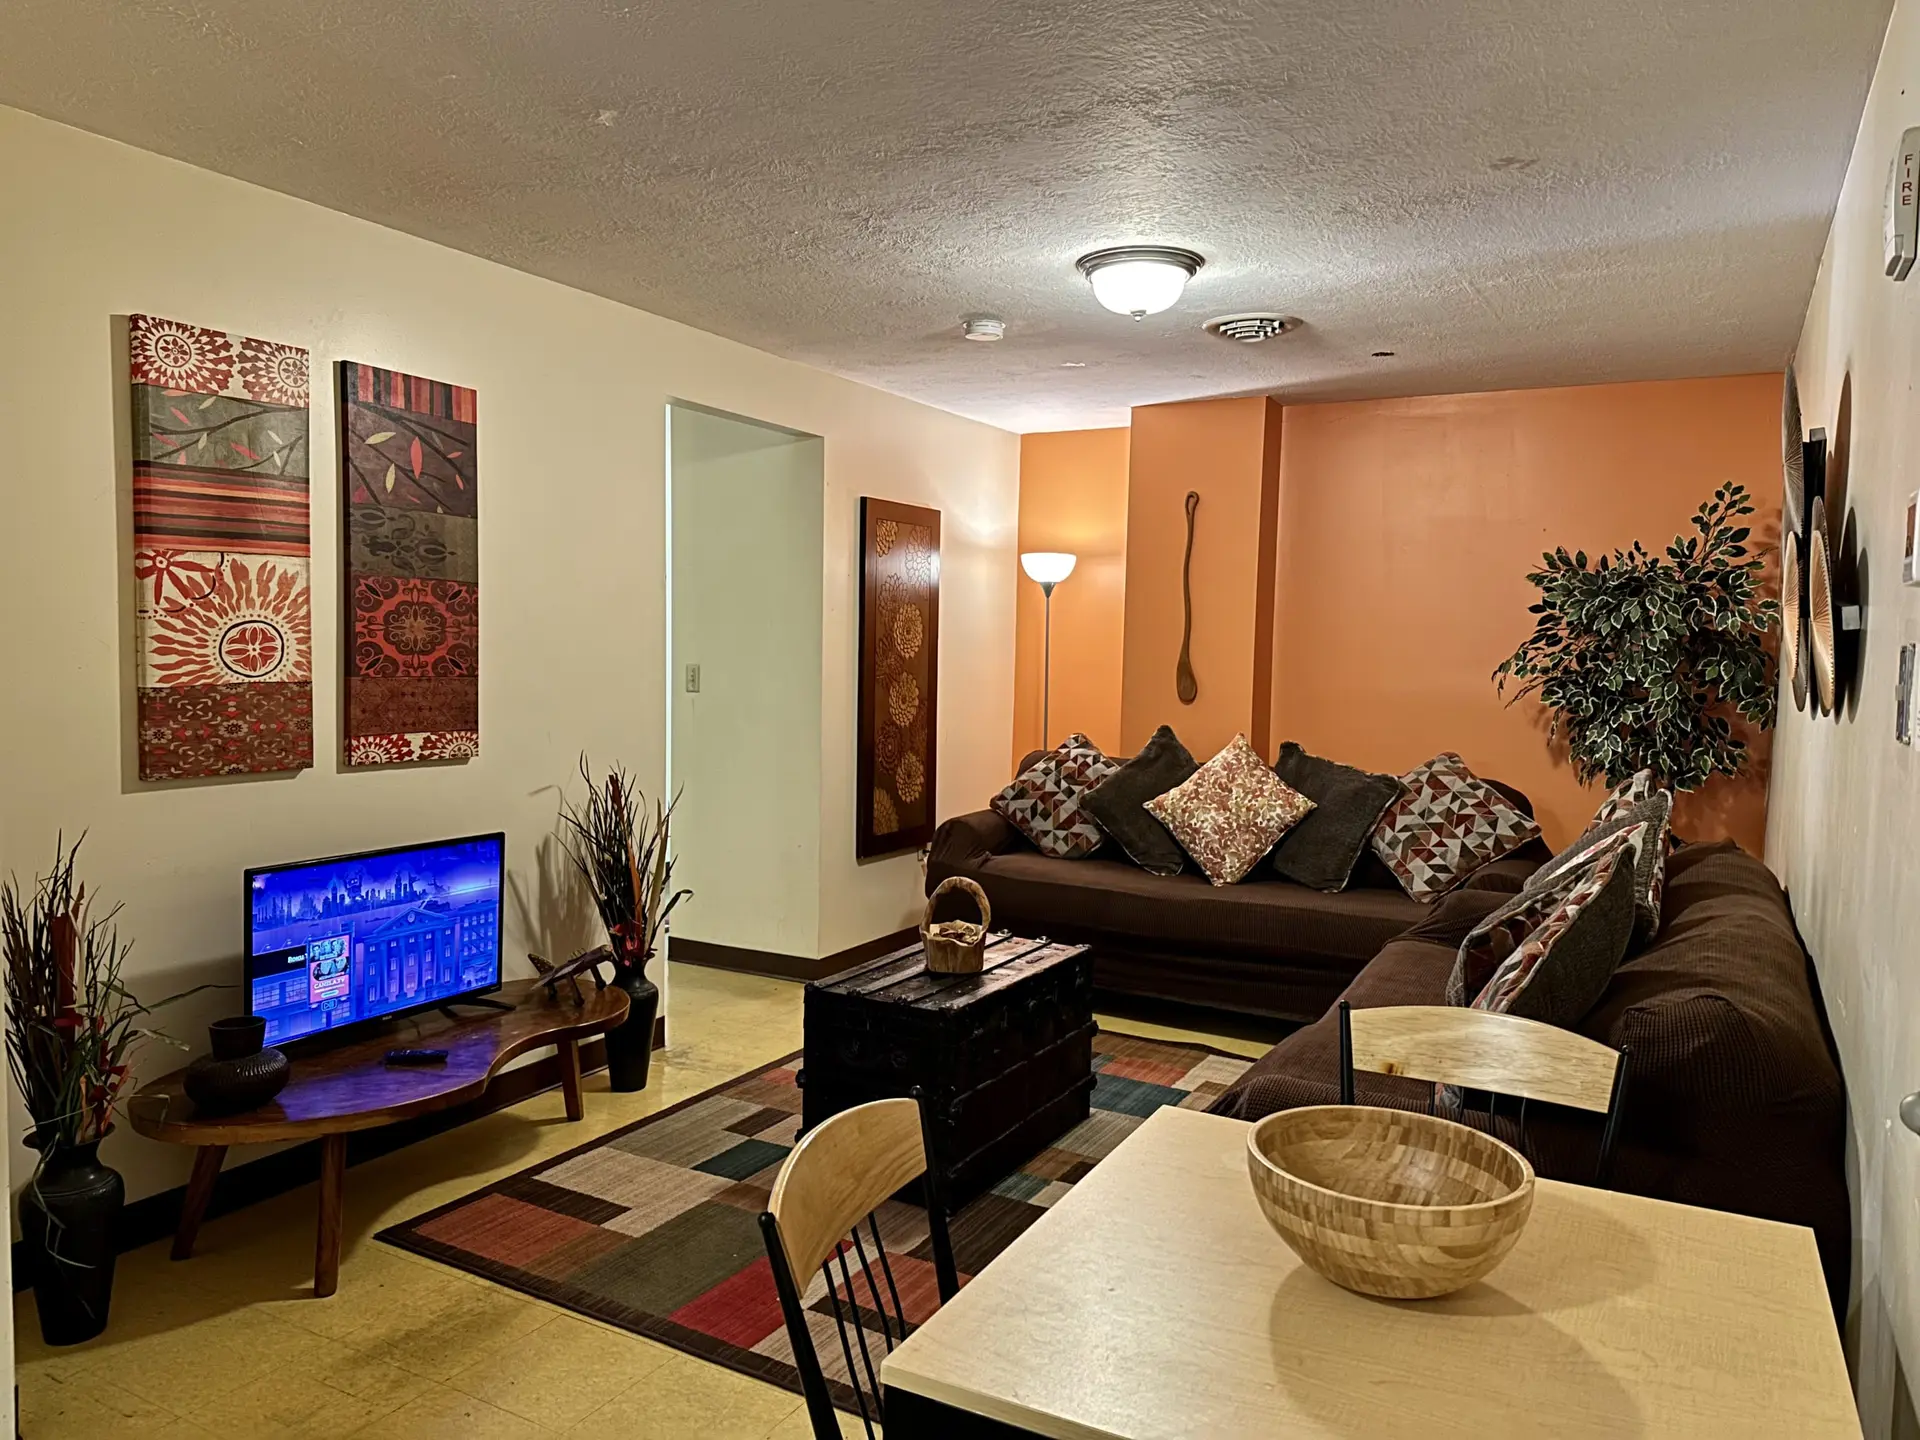 6 Beds | Downtown Apt | Very Quick Walk Everywhere